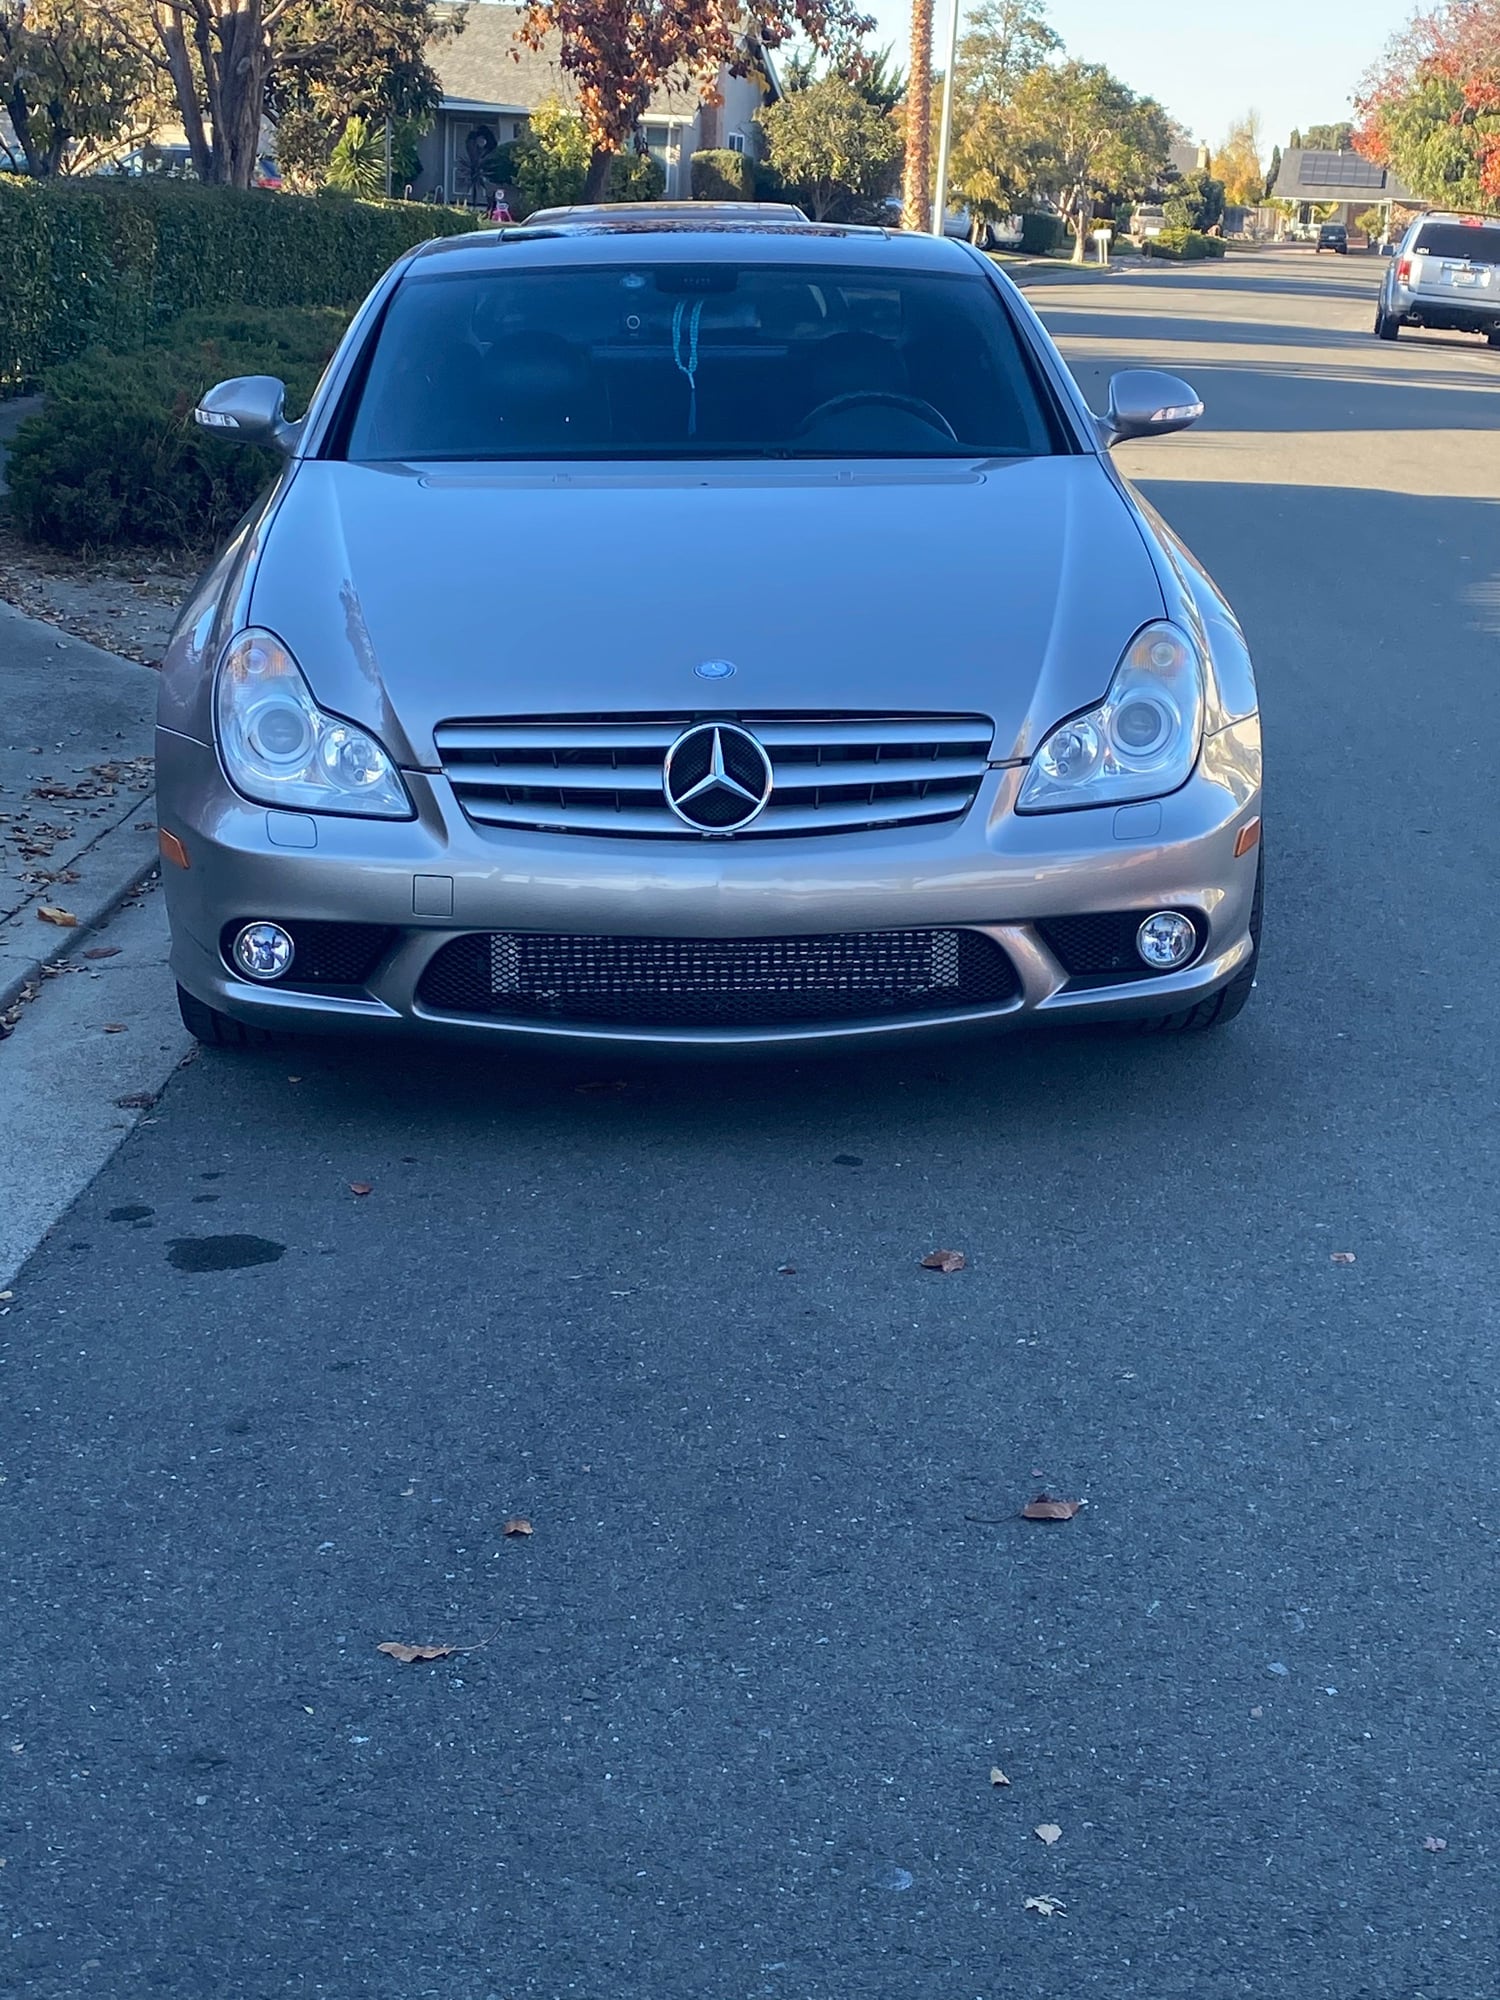 2006 Mercedes-Benz CLS55 AMG - 2006 Mercedes CLS55 sale feeler - Used - VIN WDDDJ76X96A023734 - 75,600 Miles - 8 cyl - Automatic - Fremont, CA 94555, United States